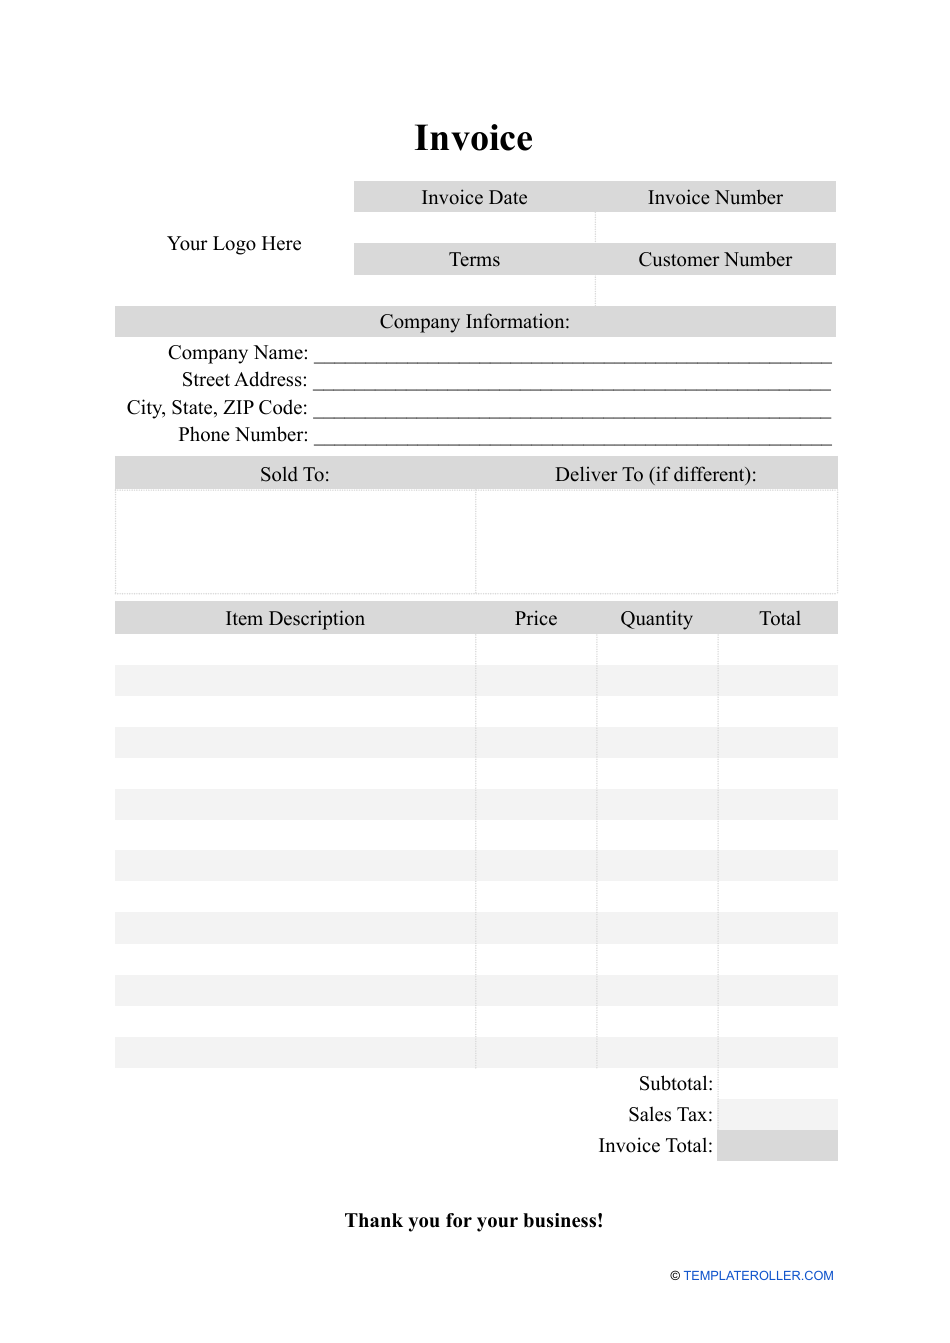 blank-invoice-template-portrait-fill-out-sign-online-and-download-pdf-templateroller